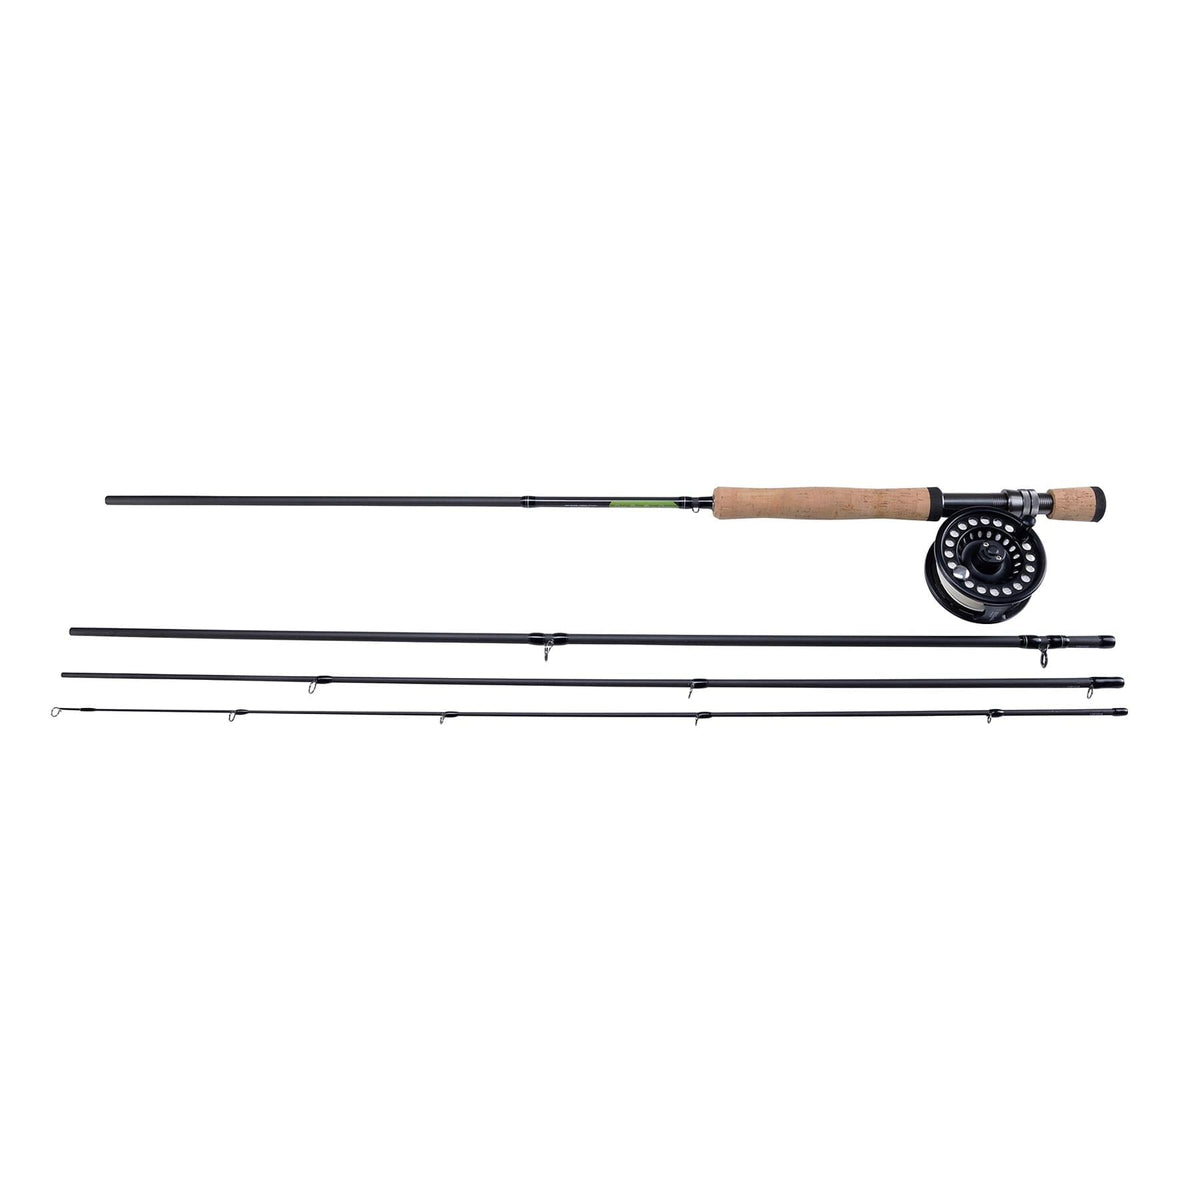 Shakespeare Sigma 9FT 5WT 4PC Fly Rod and Reel Combo (incl Line Loaded)